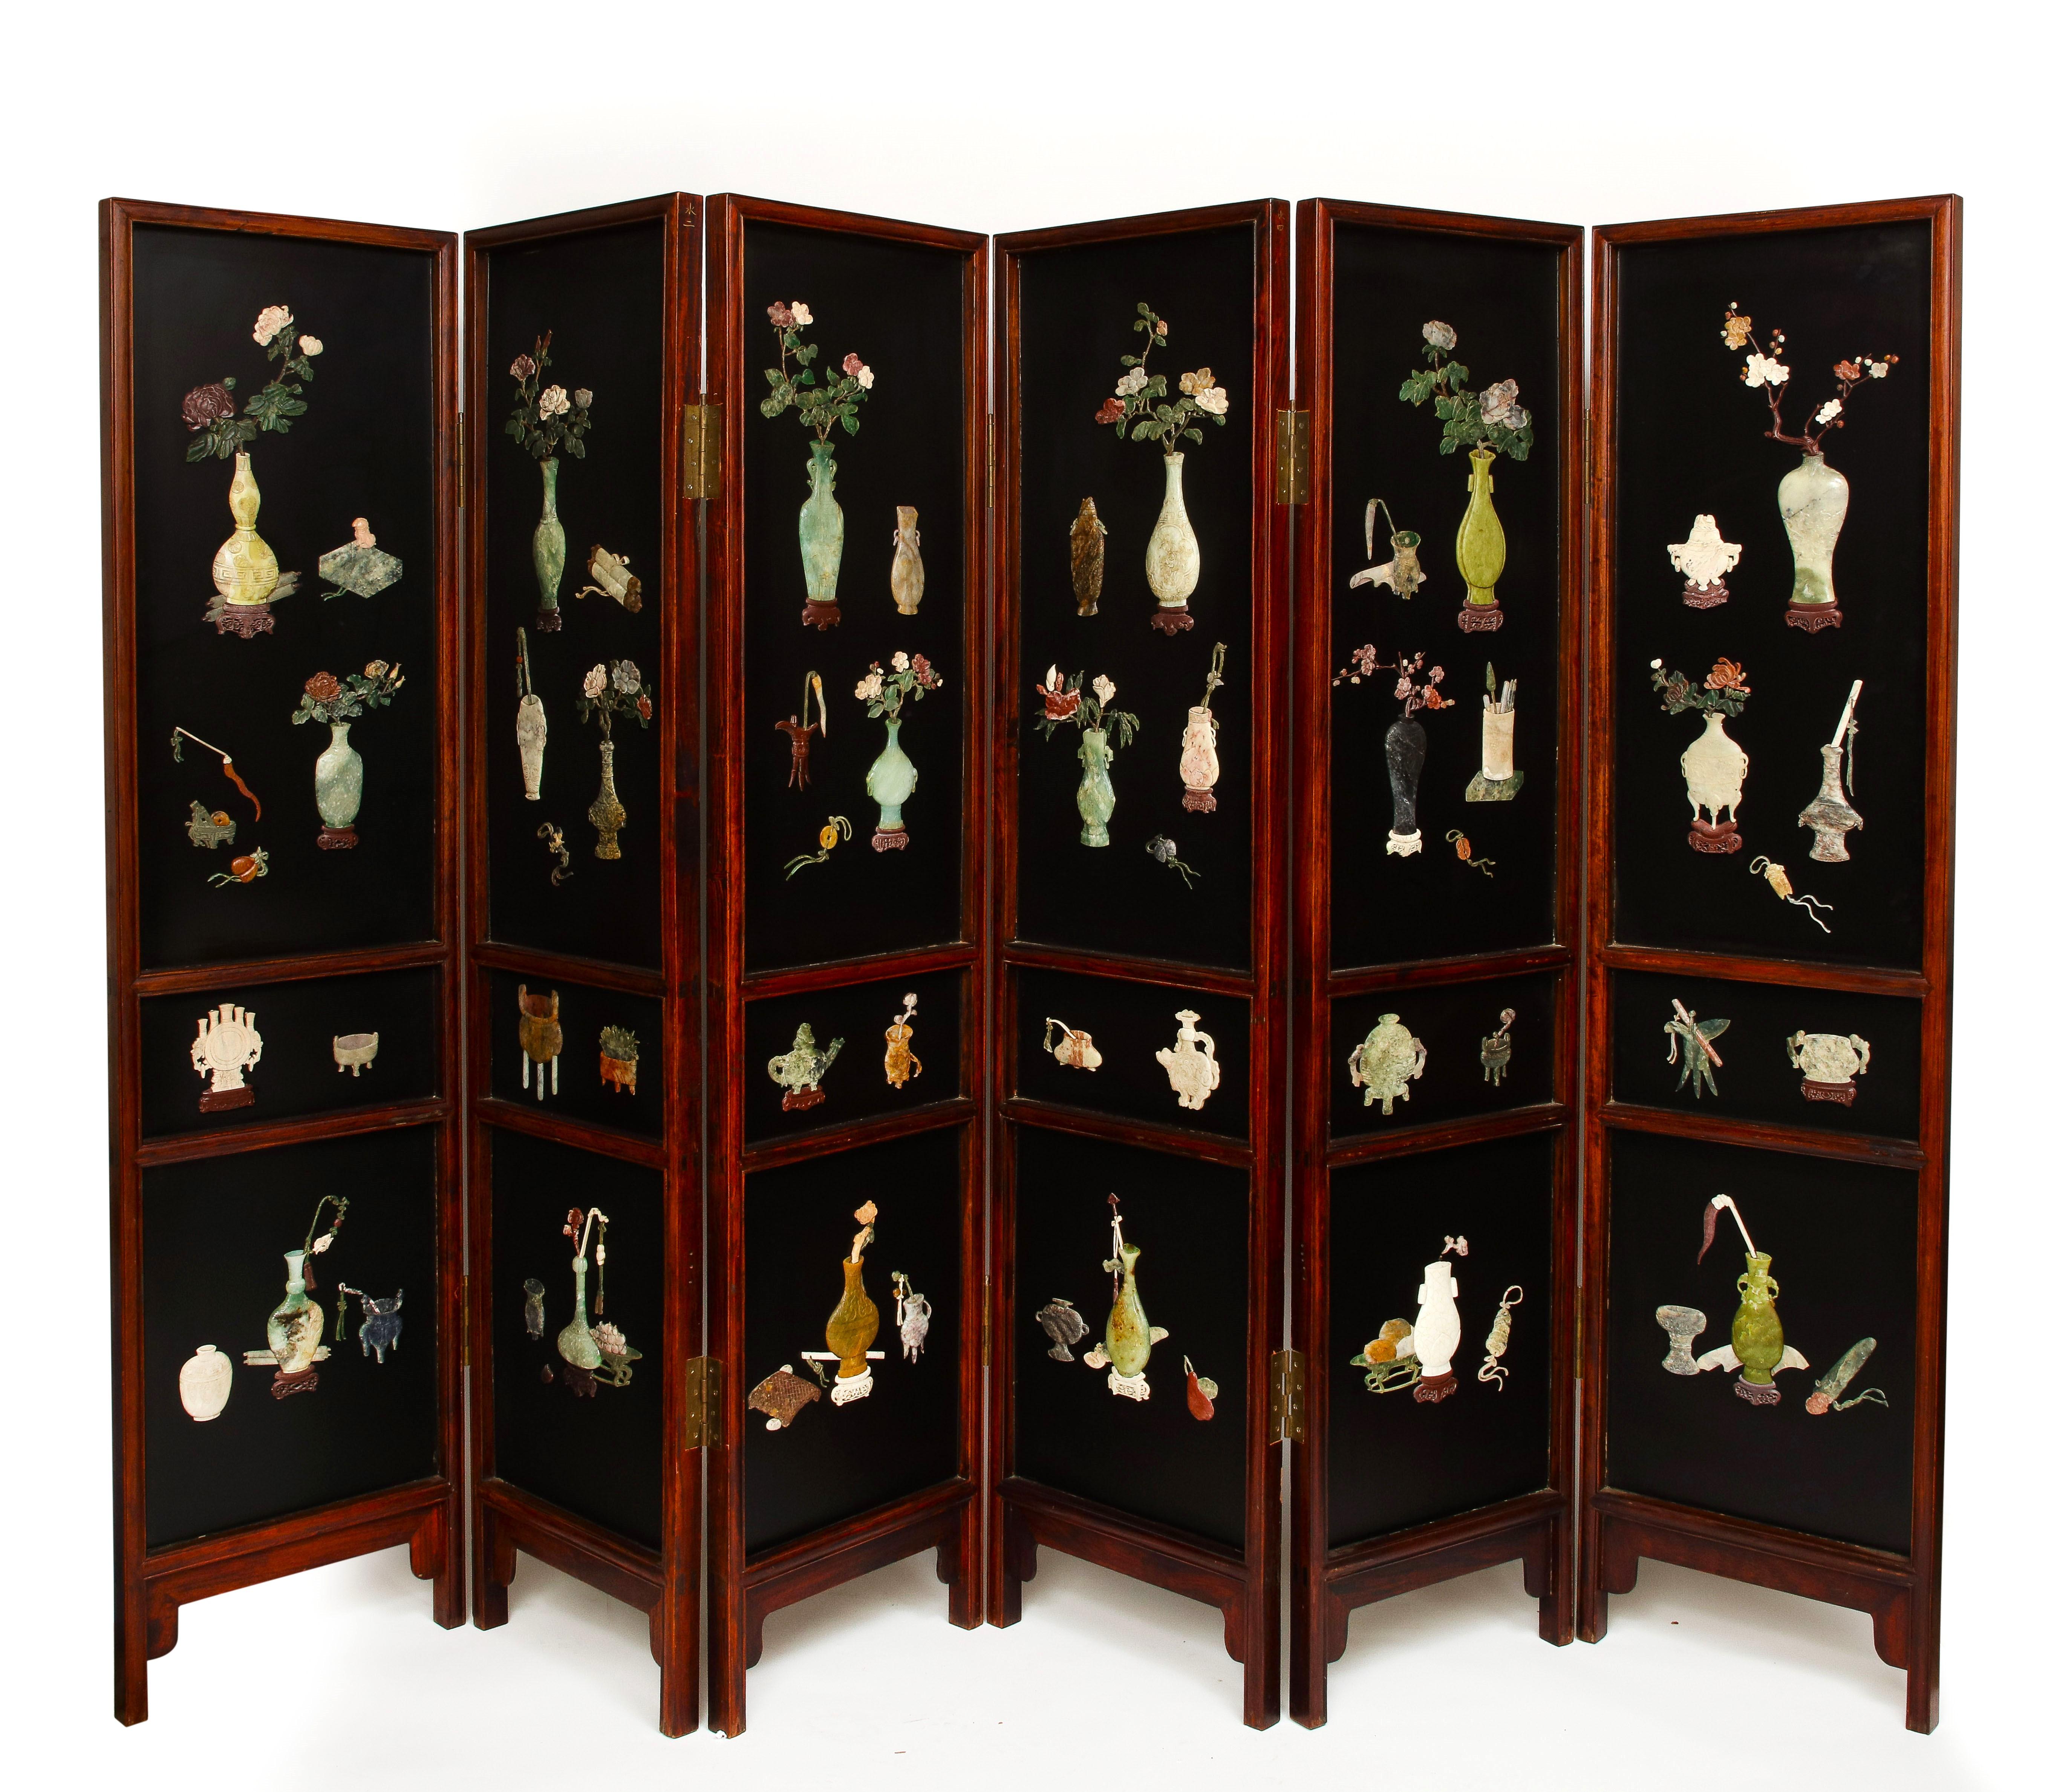 A large 20th century Chinese six panel Lacquered Hardstone and Jade Coromandel screen. This screen features intricately carved hardstone, soapstone, jade, lapis, quartz, and other hardstones from China. Each panel is is very large and has three